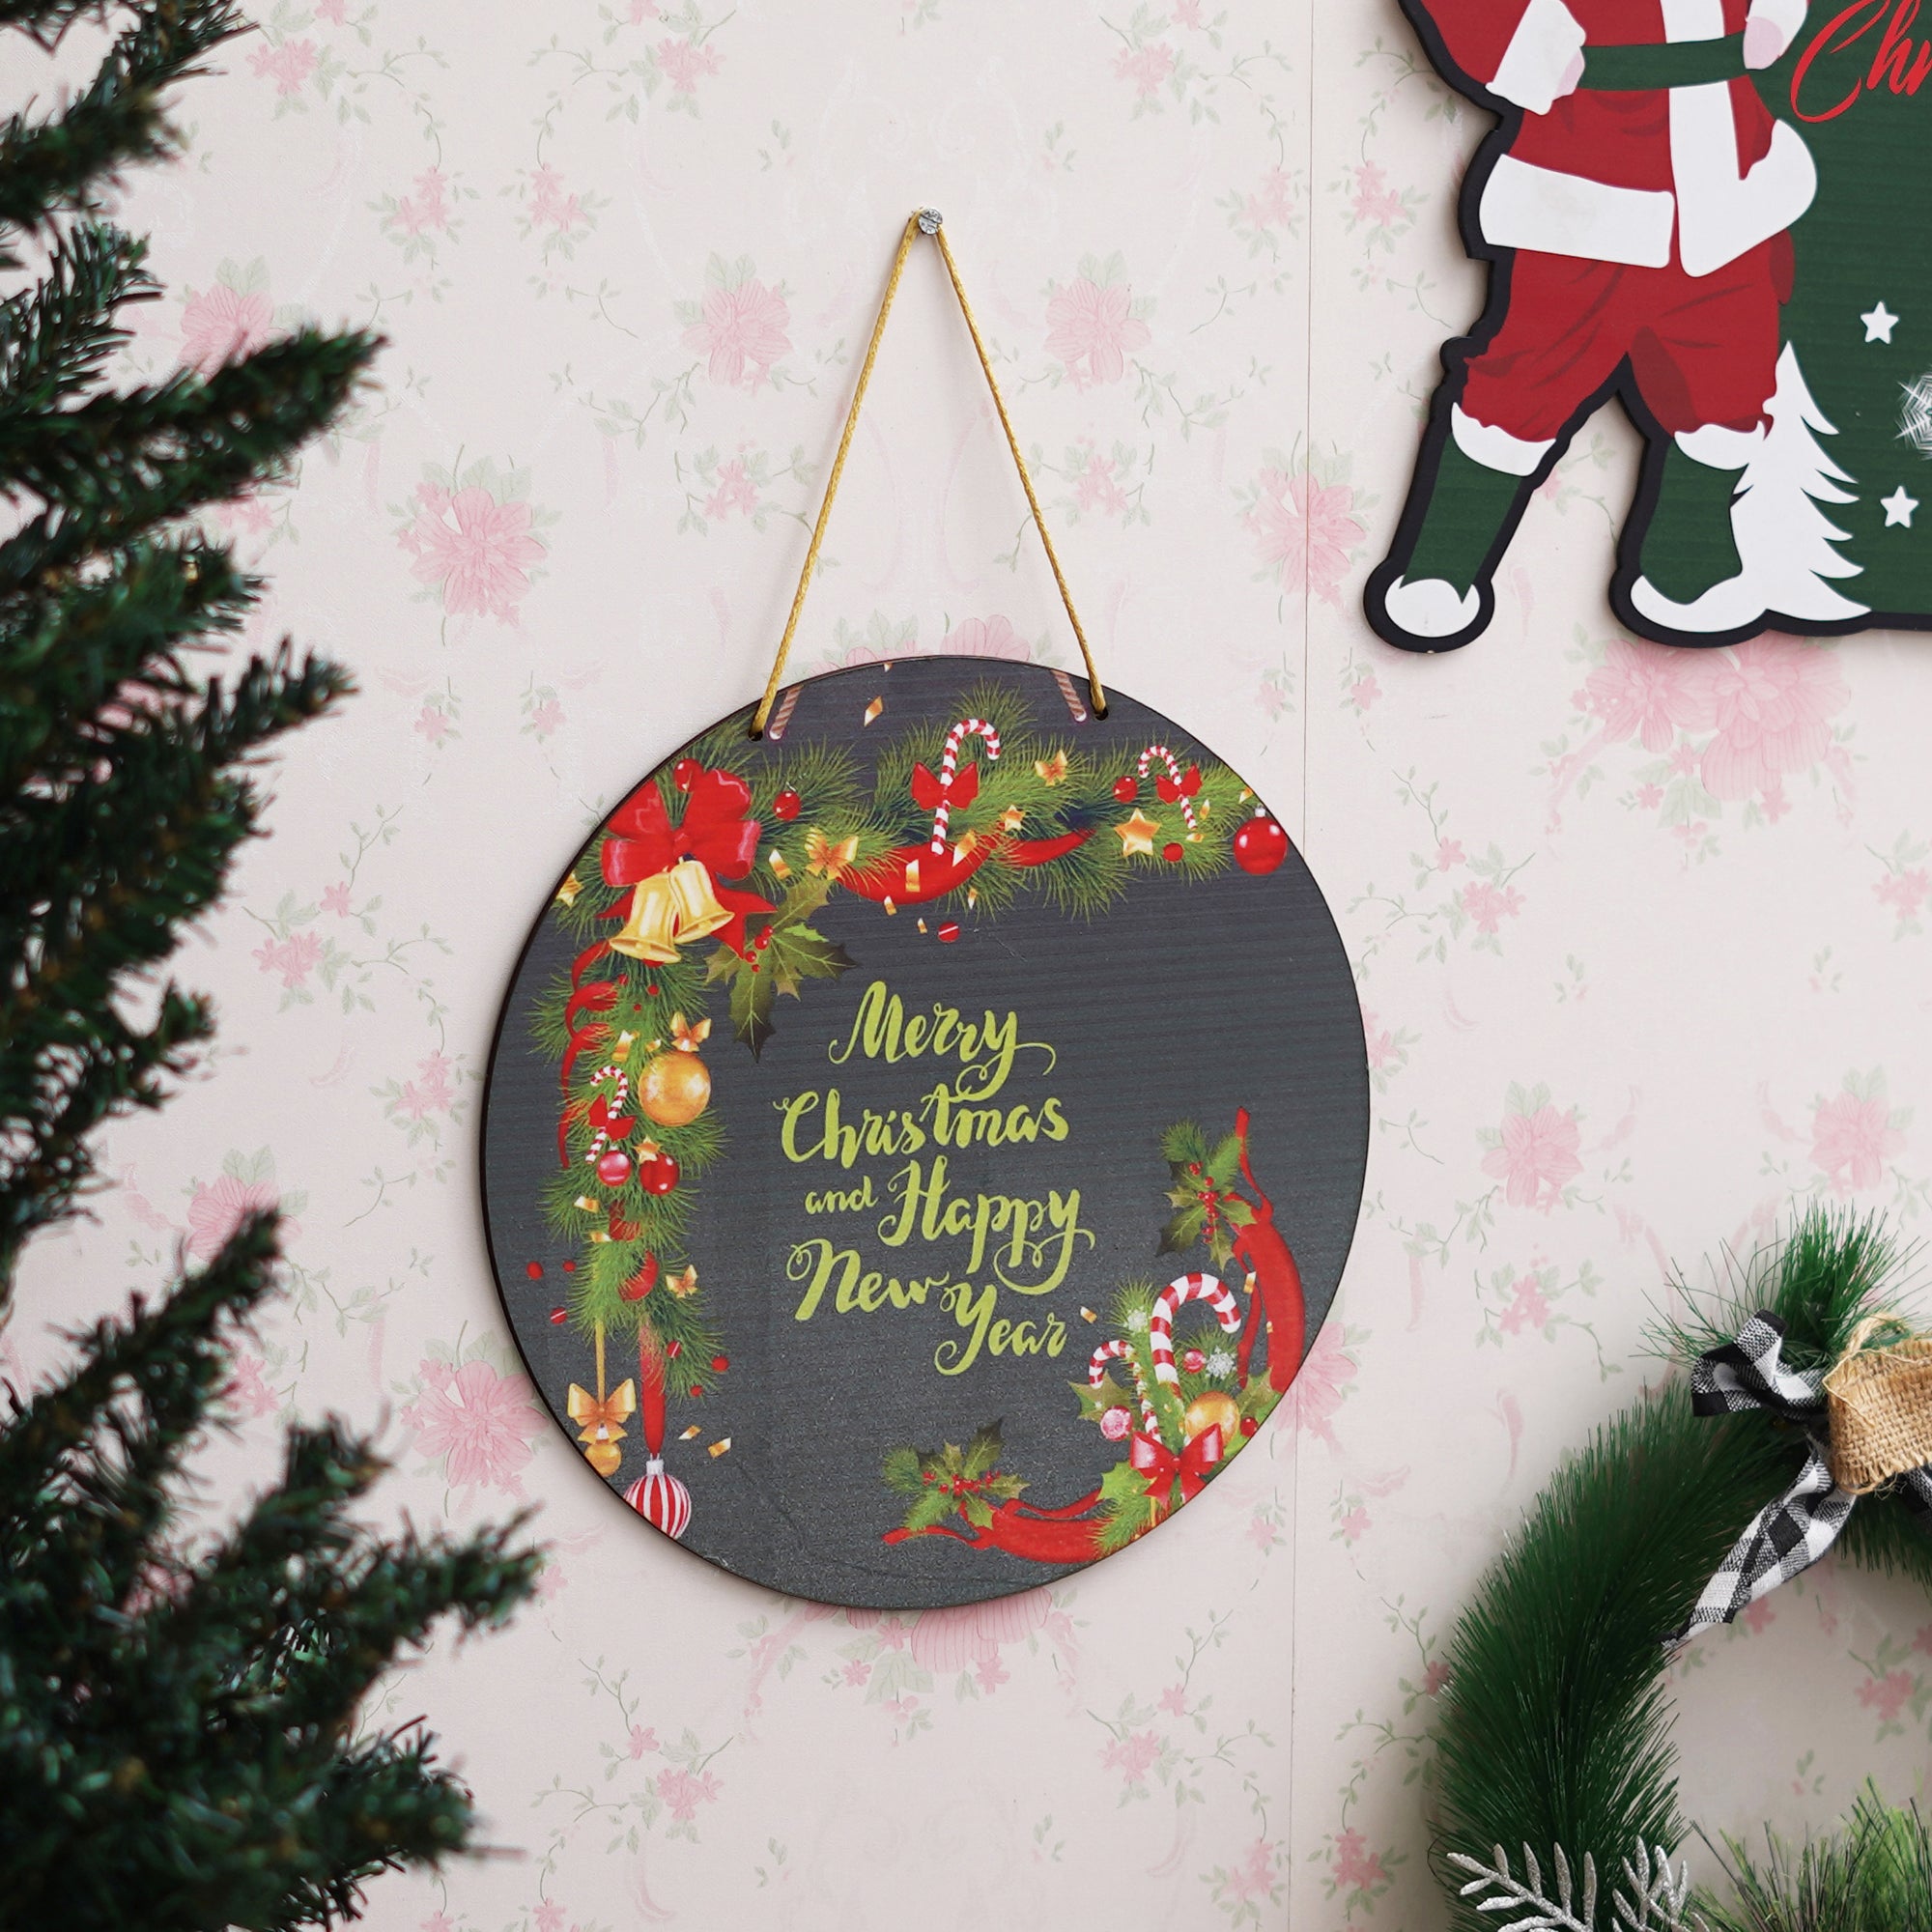 eCraftIndia "Merry Christmas and Happy New Year" Printed Wall/Door Hanging for Home and Christmas Decorations (Green, Red, Golden) 4